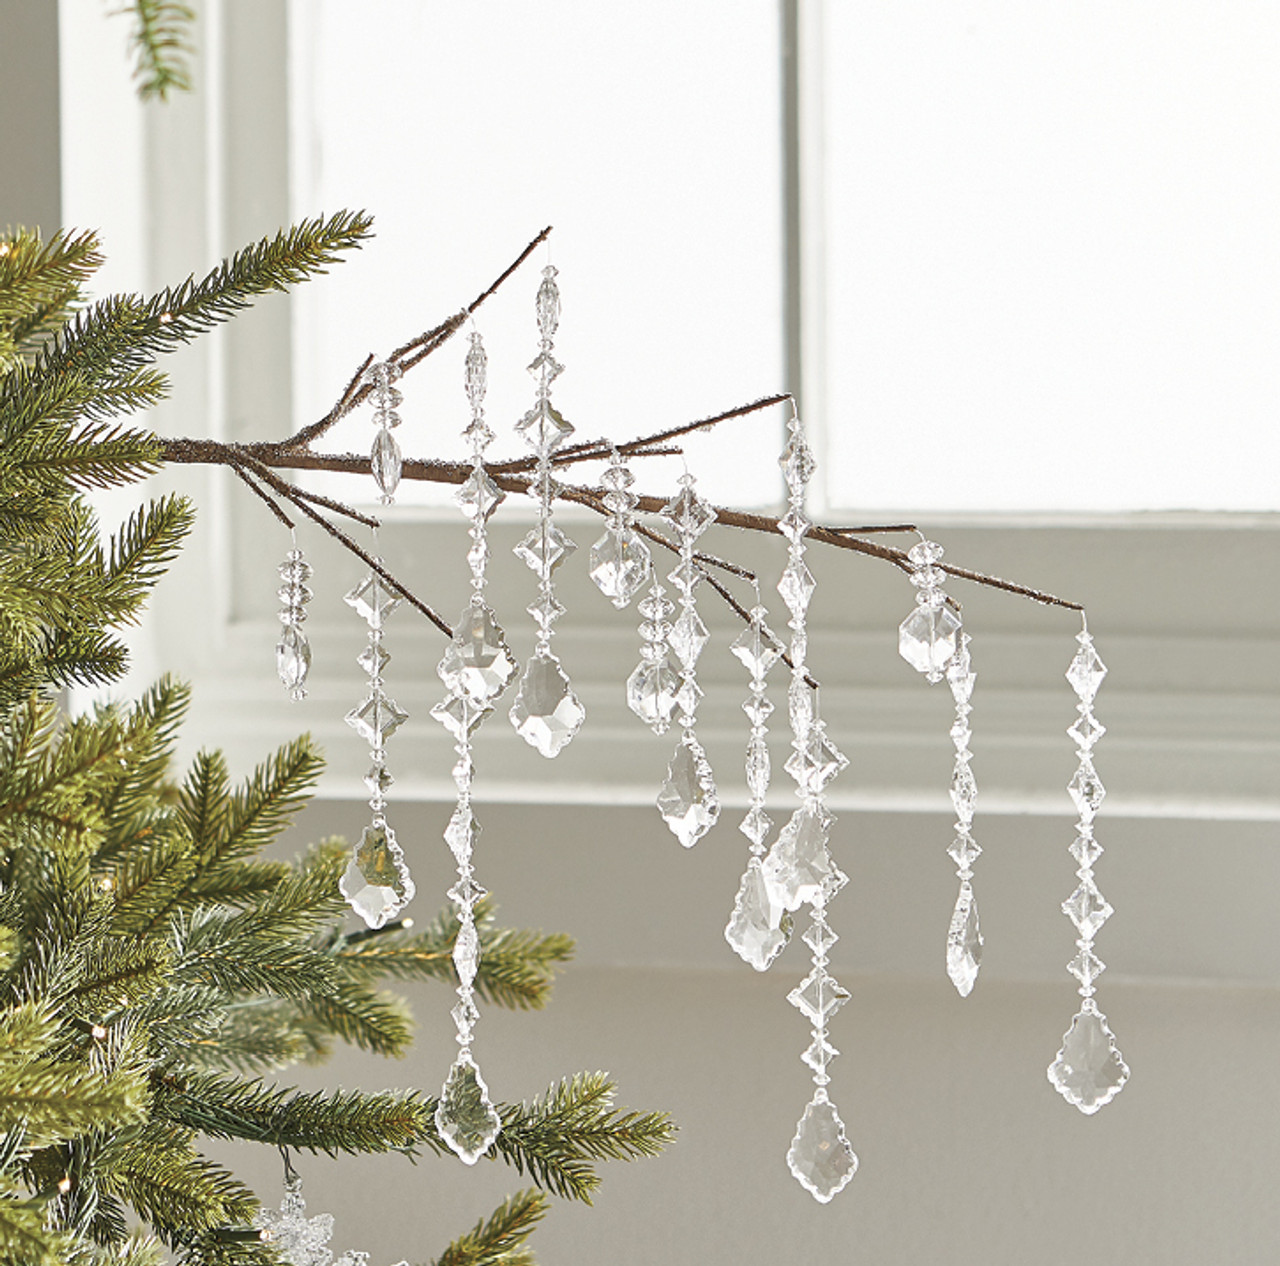 20 Pack Of 4 9 Spun Glass Icicle Christmas Ornaments Christmas Tree Ornaments Unique